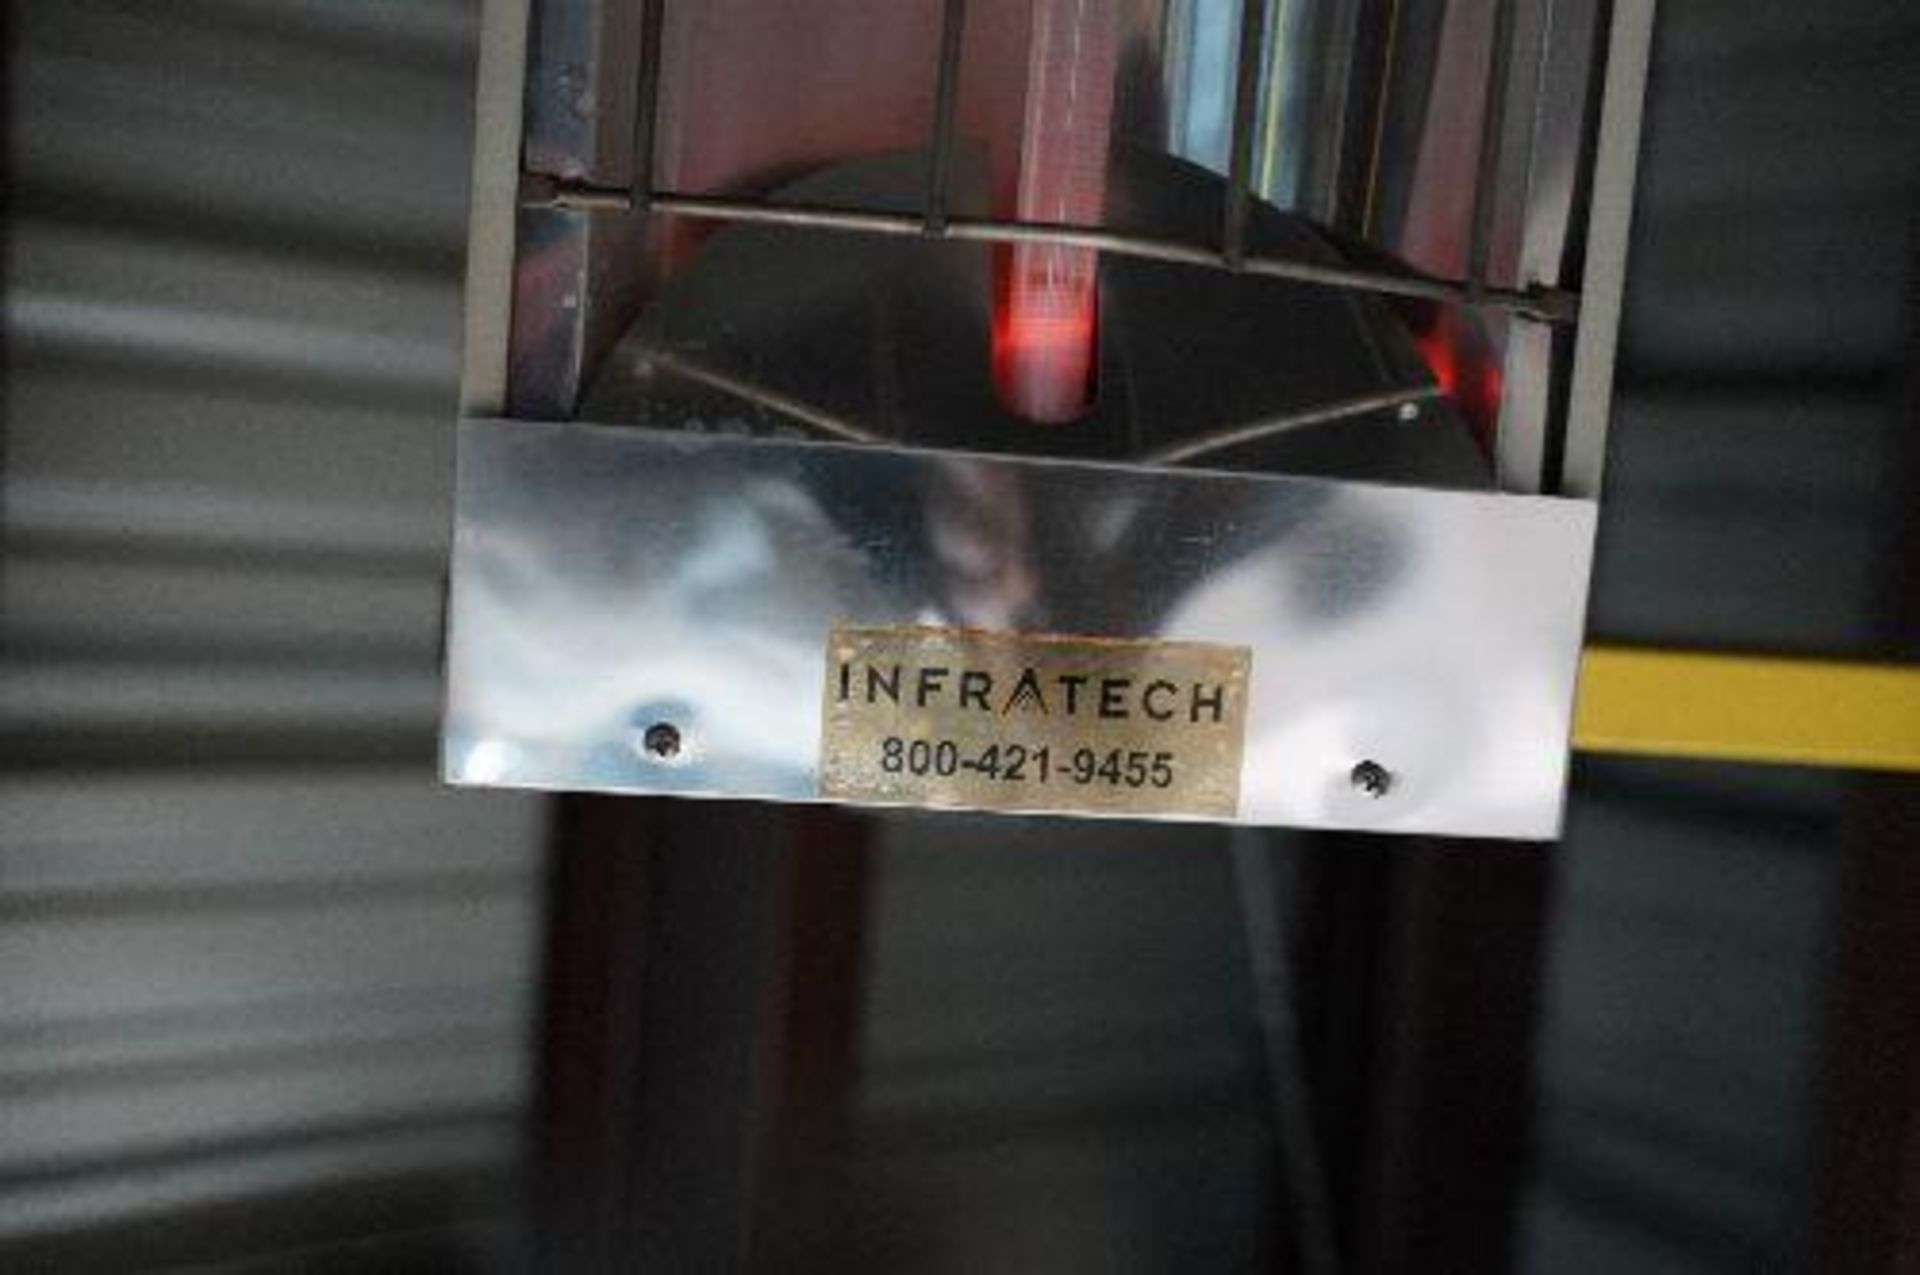 Infratech Oven - Image 13 of 32